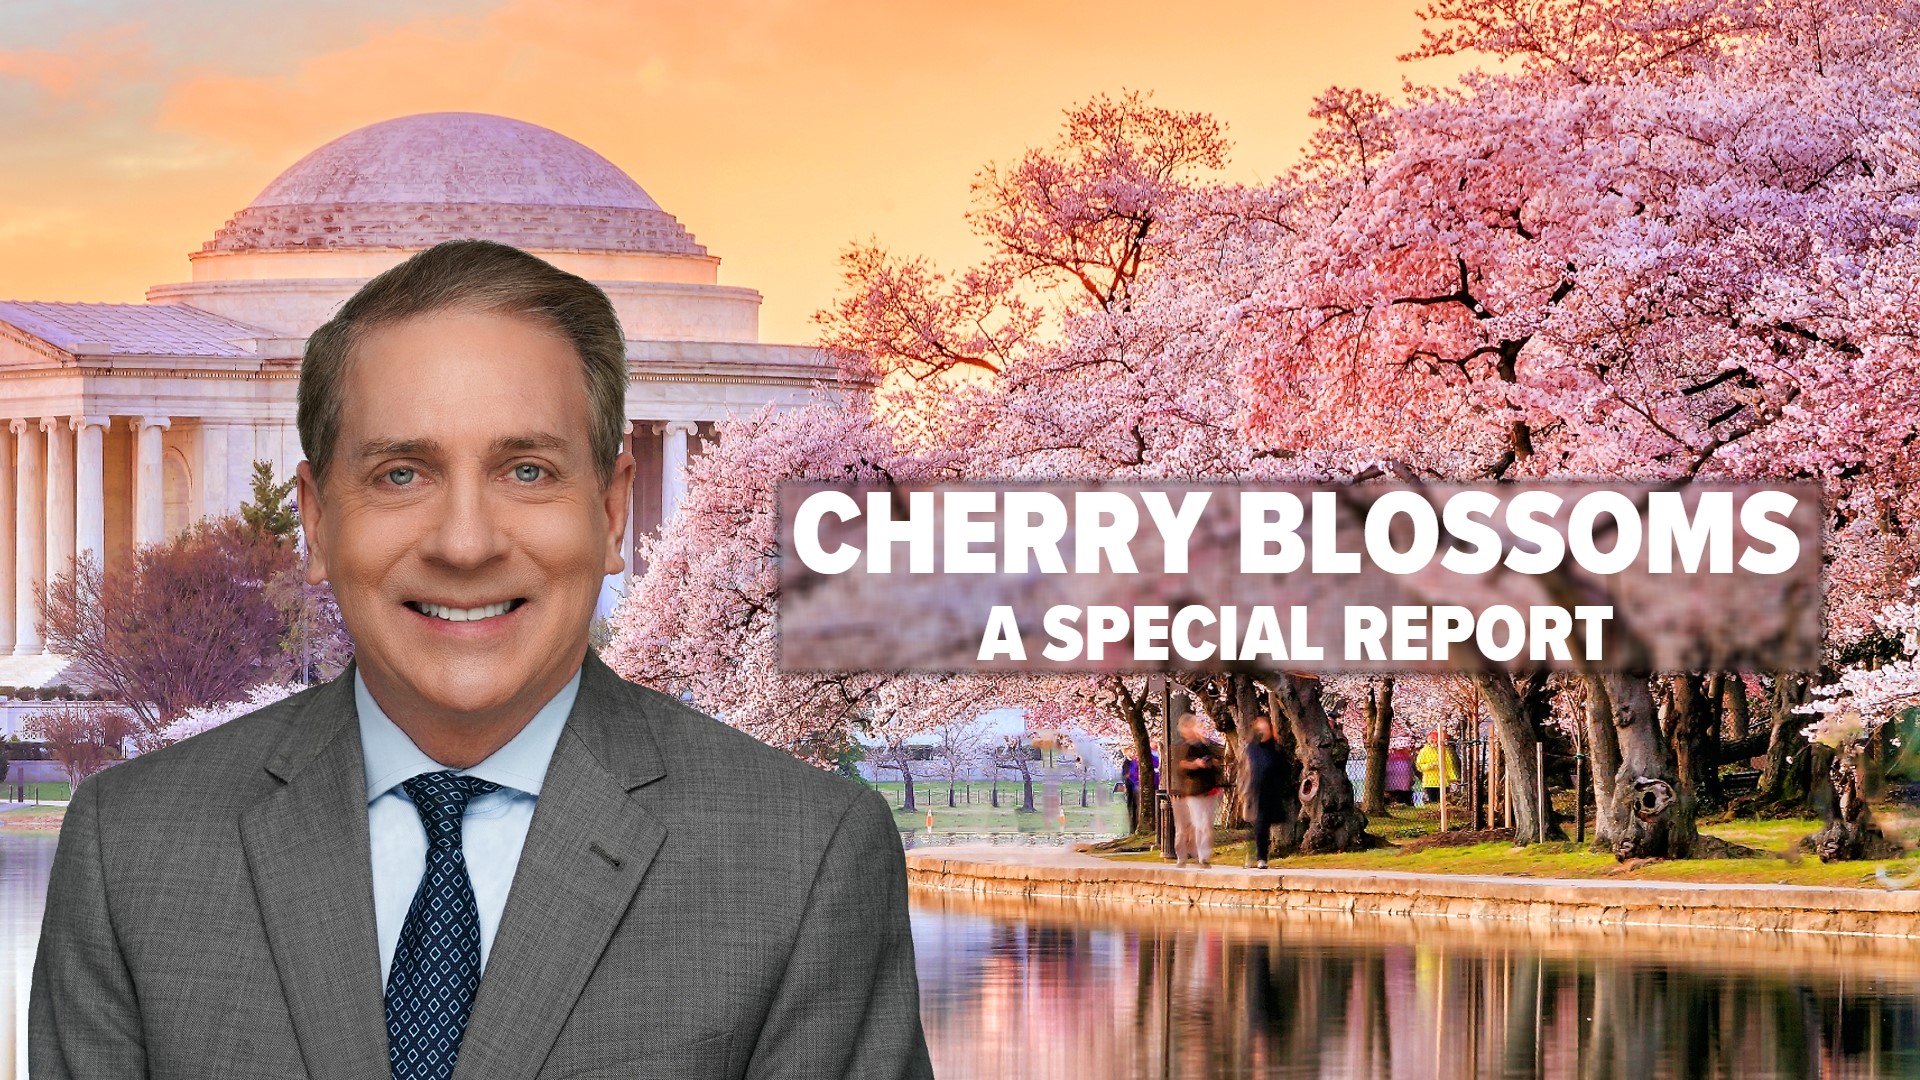 Everything you need to know about Cherry Blossom season in Washington, DC.